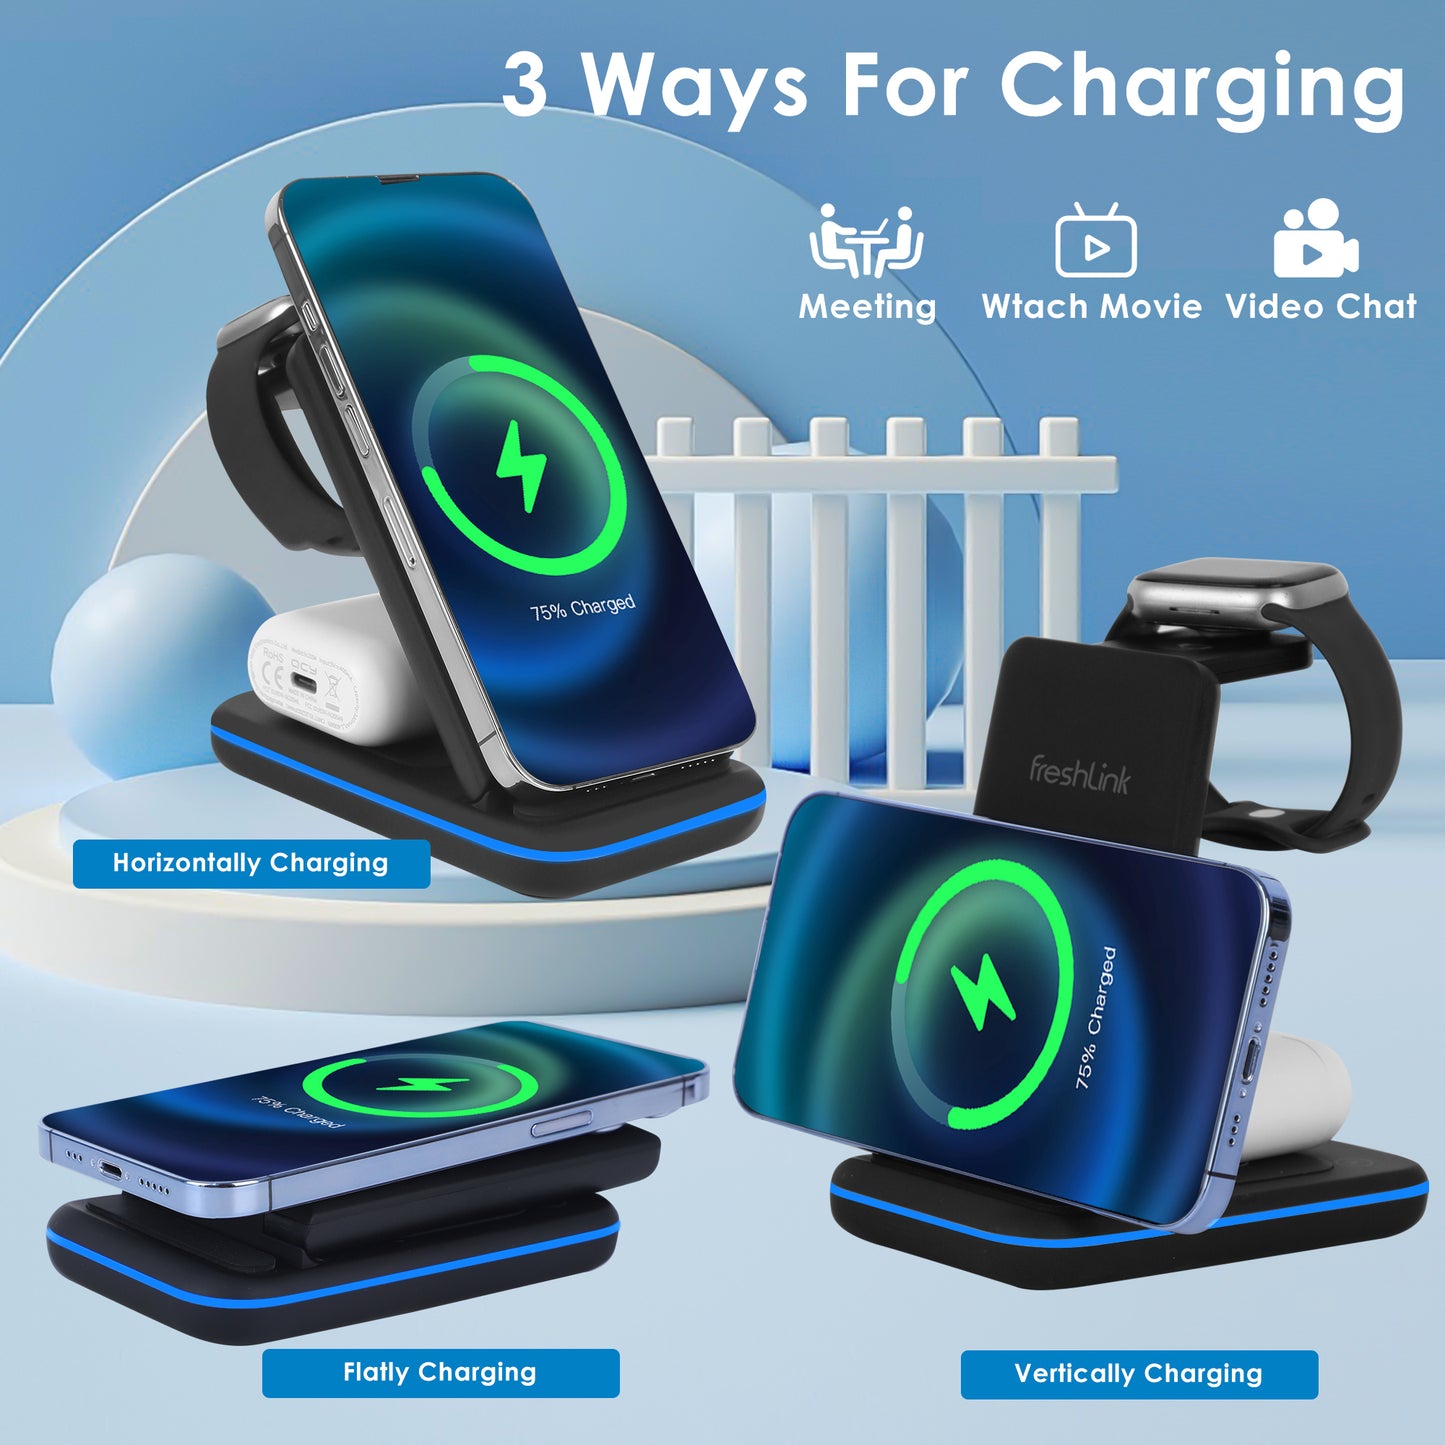 Foldable 3 in 1 Wireless Charger,With Certificated 18W QC 3.0 Adapter